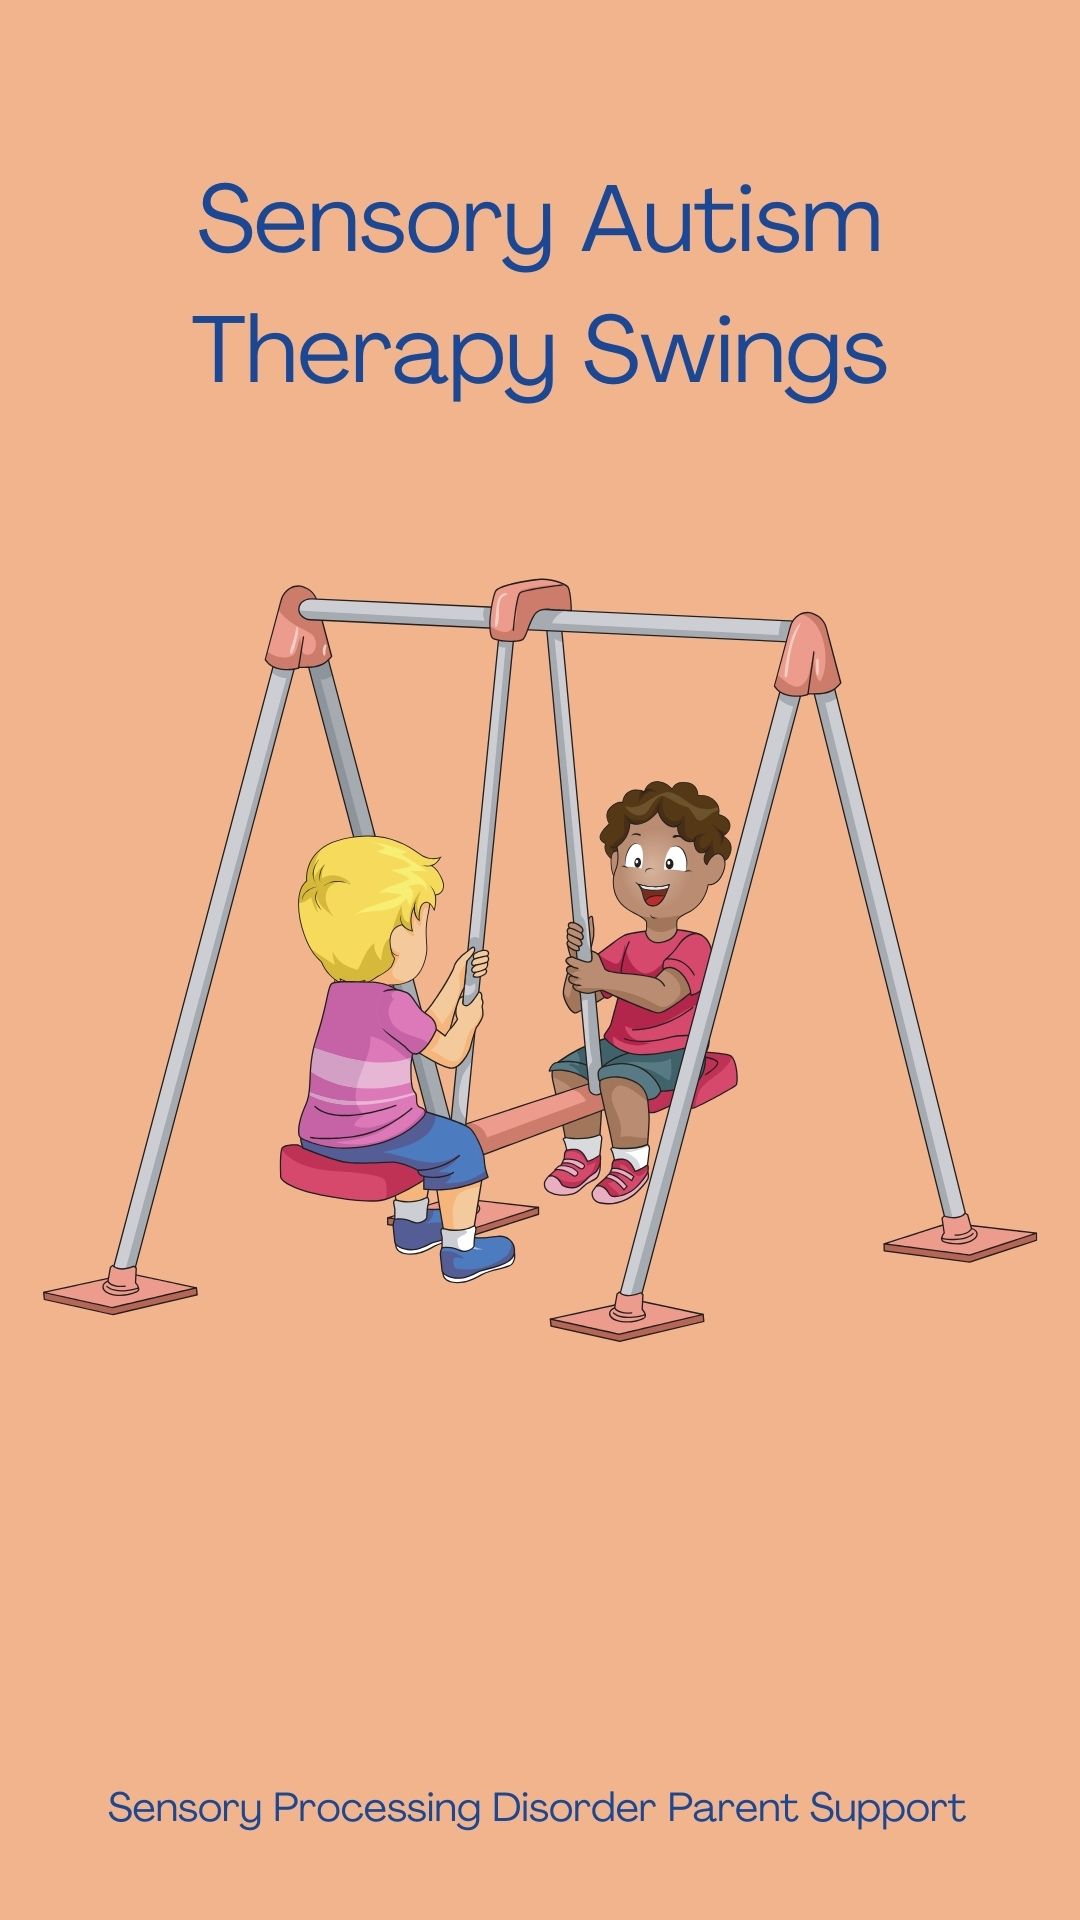 Sensory Autism Therapy Swings